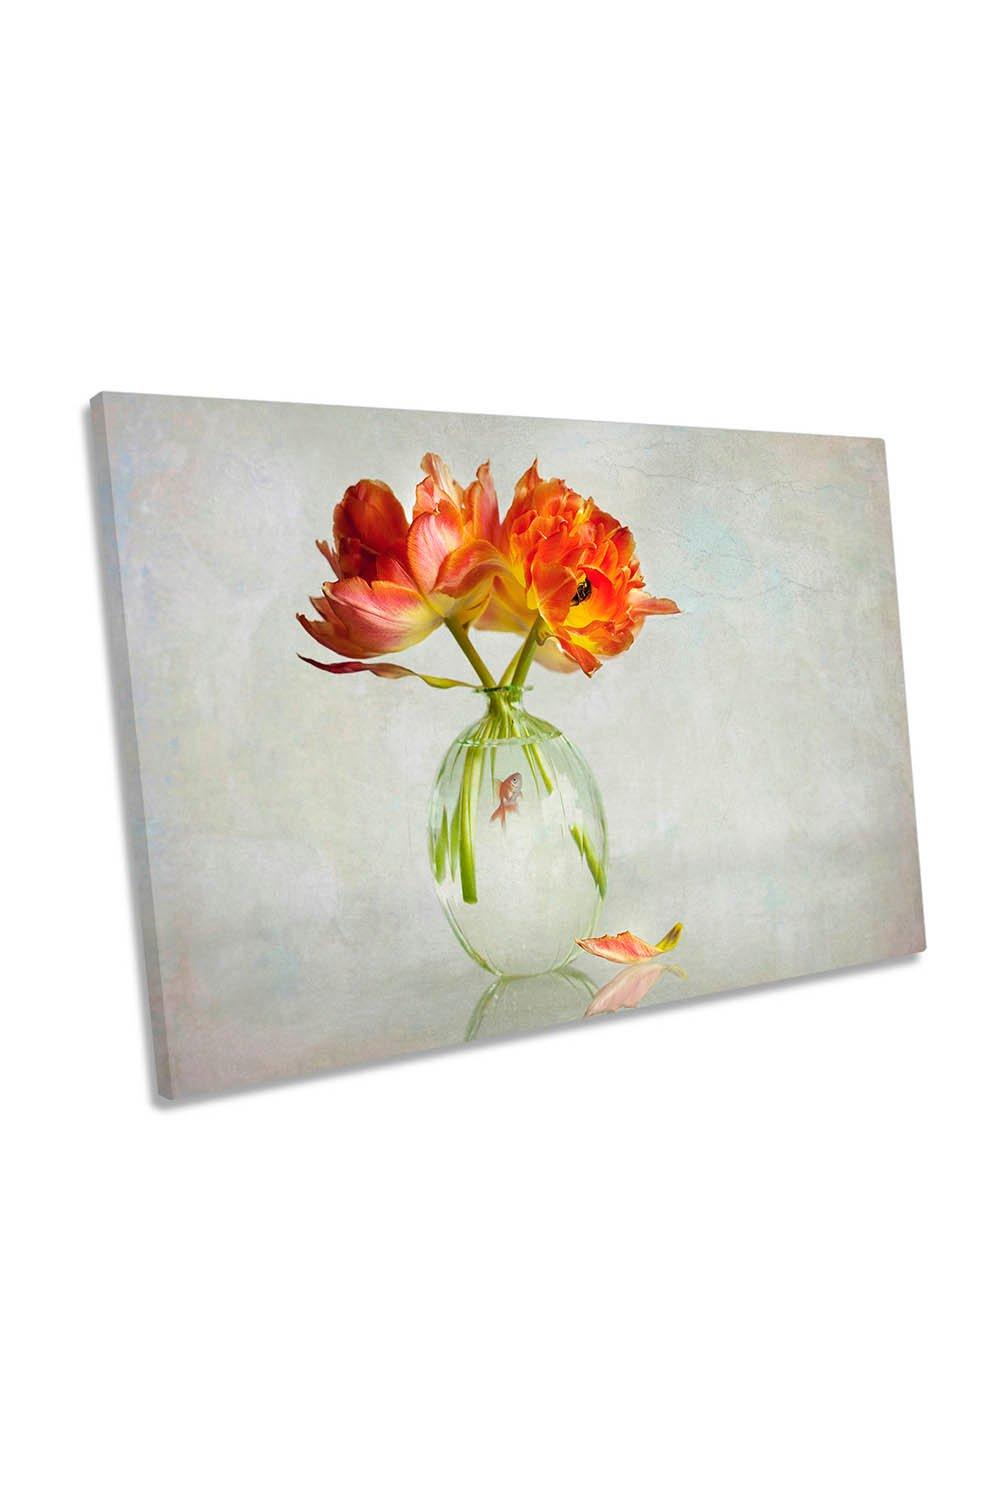 Red Tulip Flower Goldfish Canvas Wall Art Picture Print